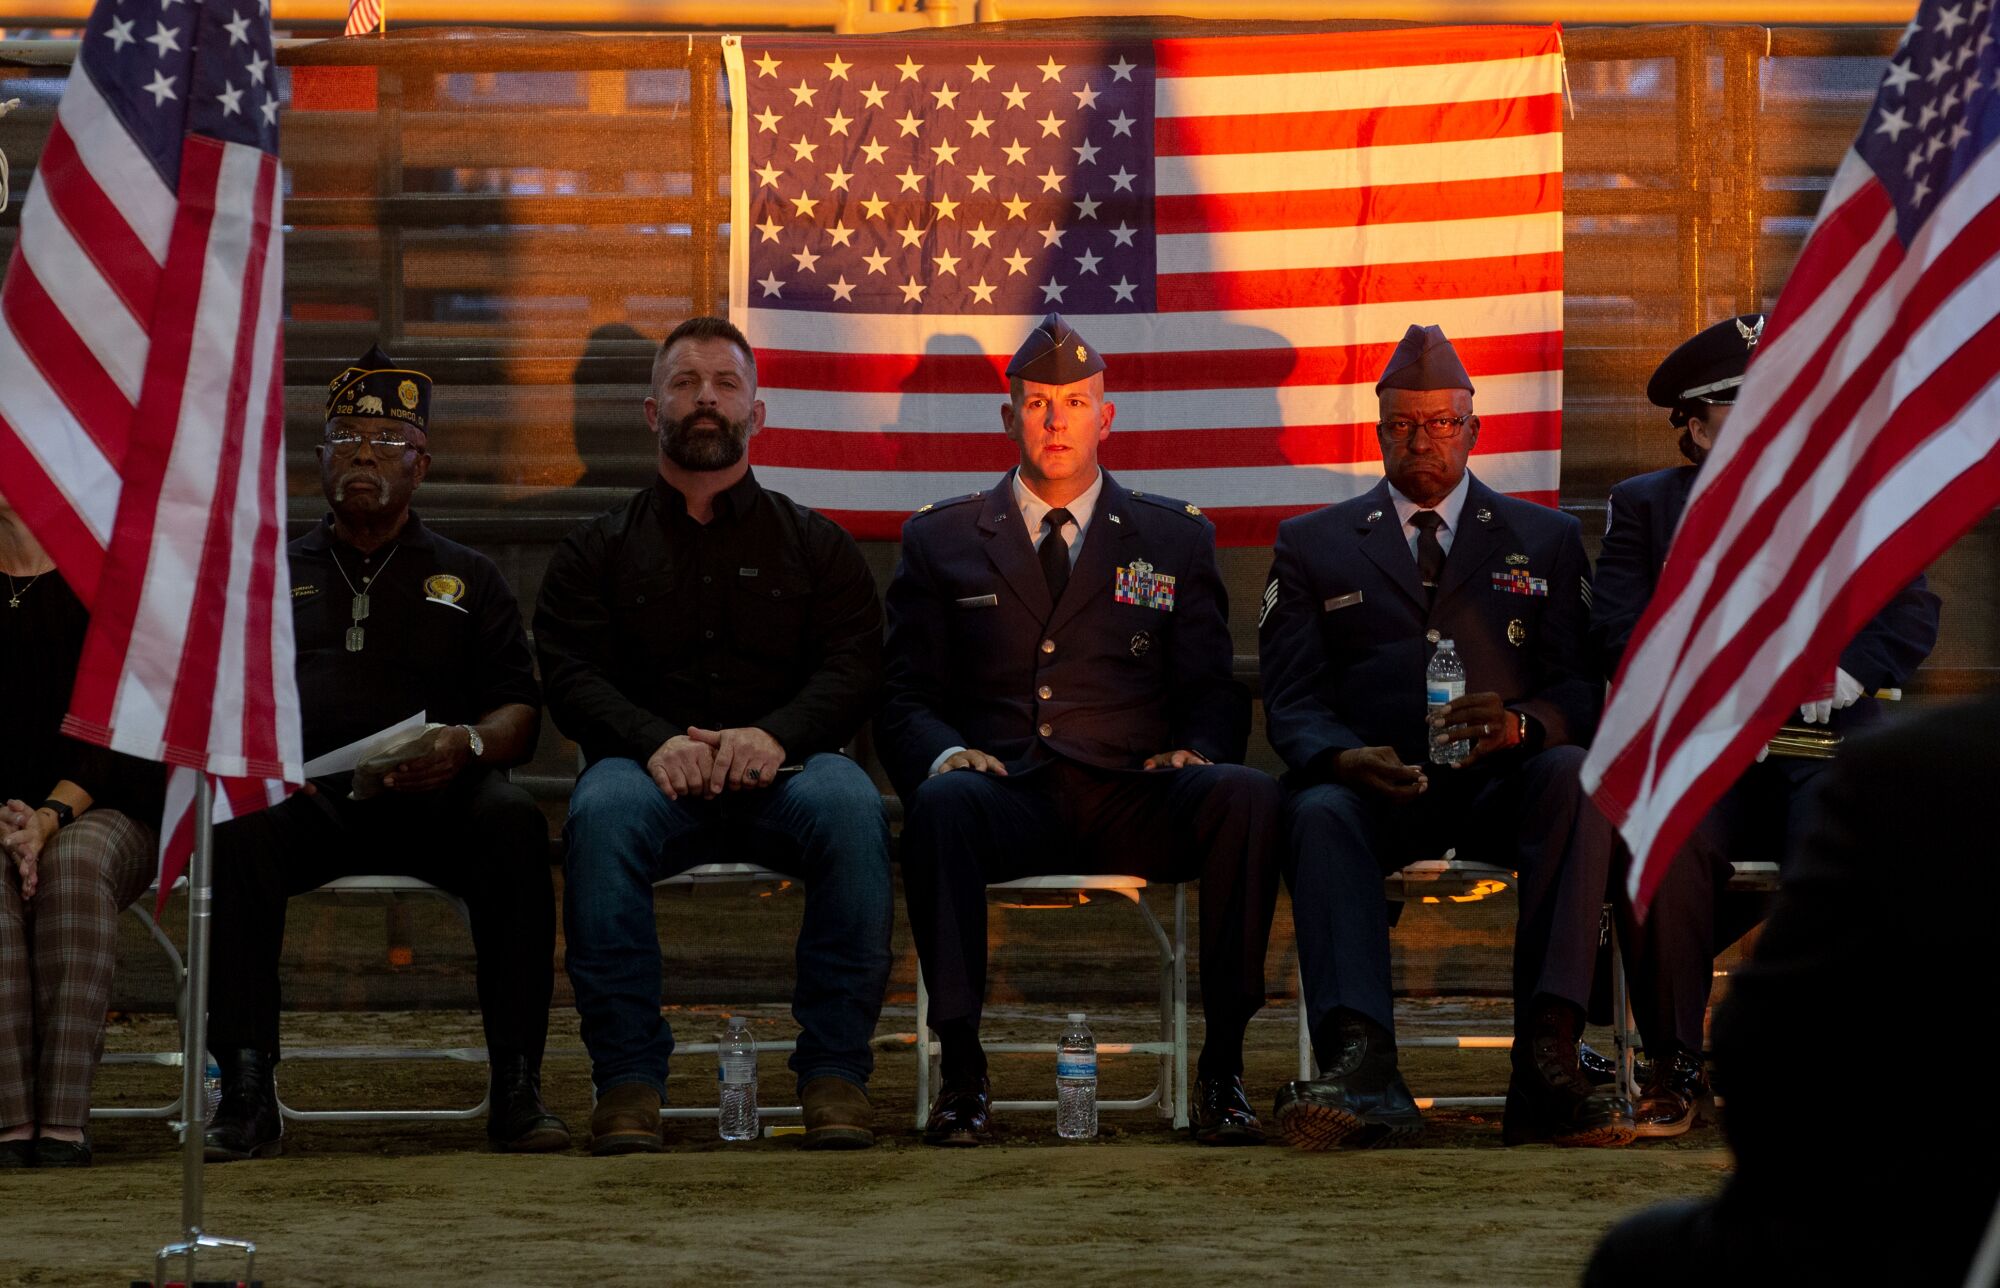 Men sit in chairs in front of a U.S. flag. Some are in military uniform.